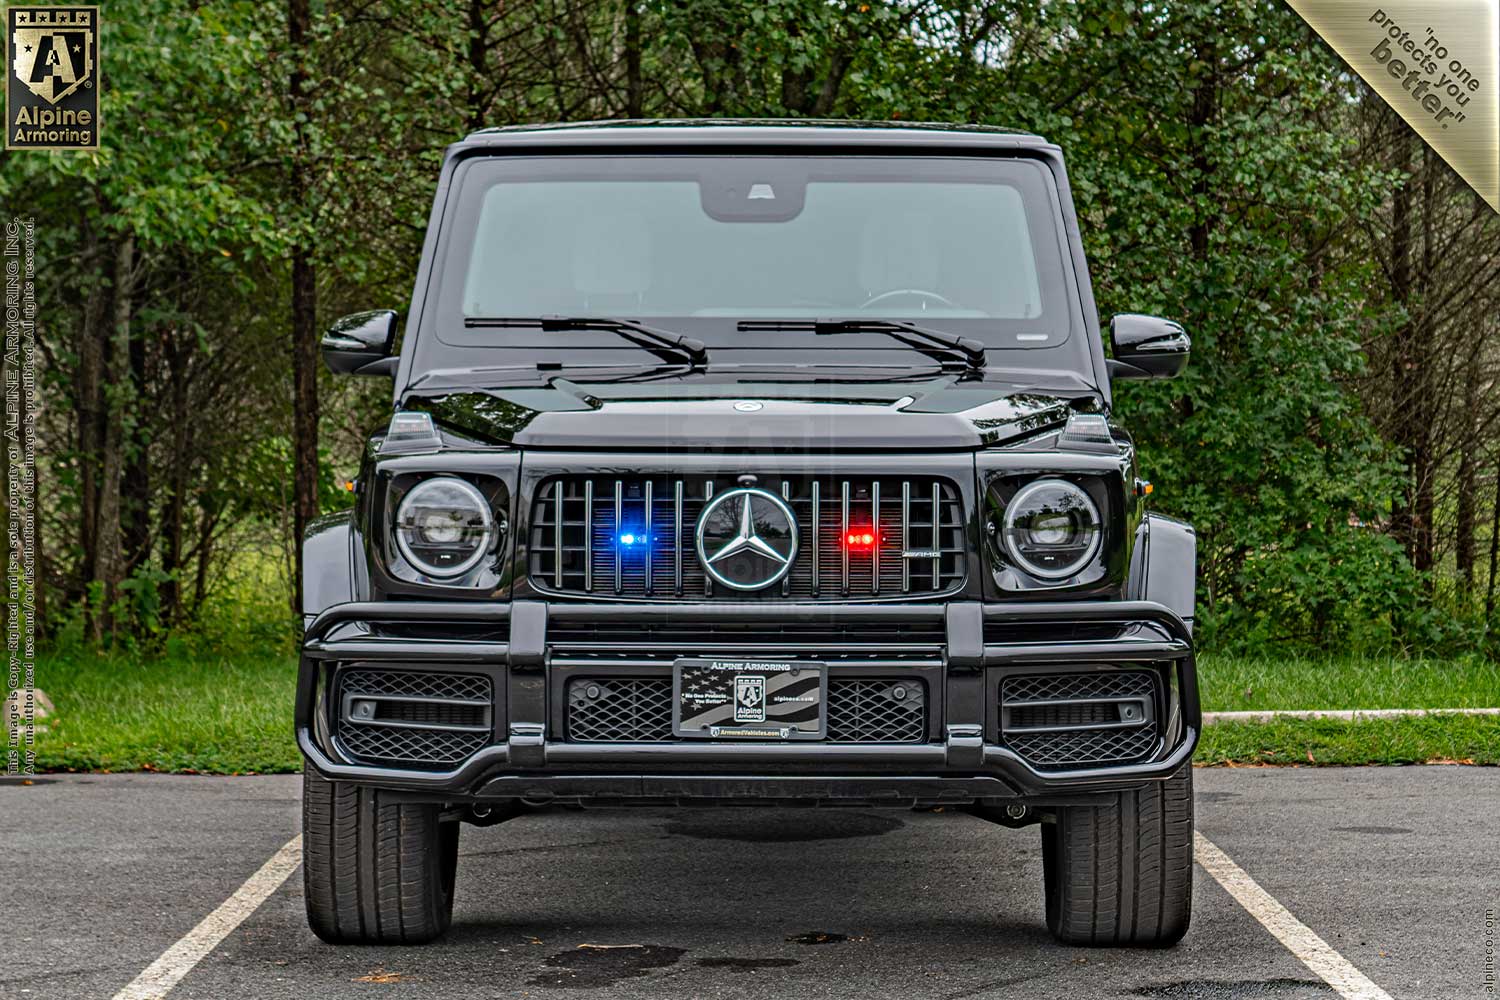 New Inventory armored Mercedes-Benz G63 Level A9/B6+  Exterior & Interior Images VIN:7379